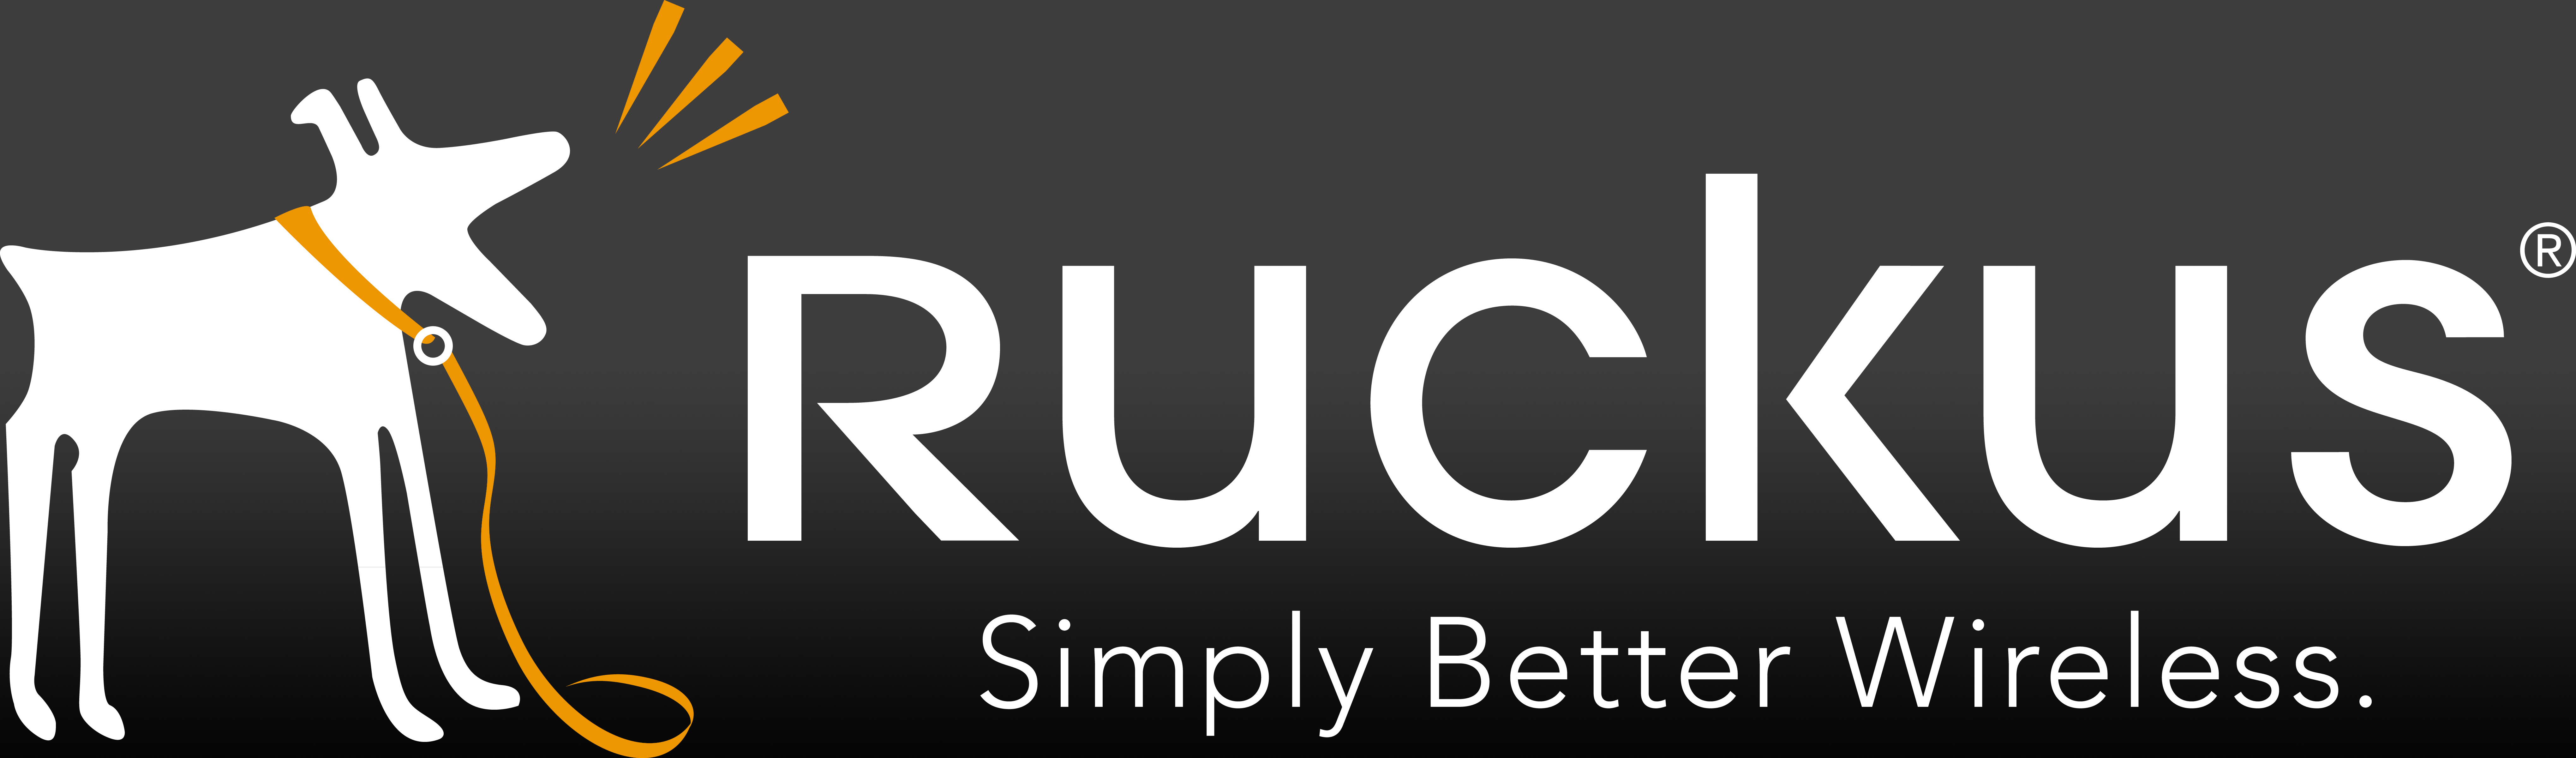 Ruckus Wireless has recently acquired Cloudpath Network, a secure Wi-Fi onboarding software used to easily and securely manage on-going Wi-Fi guest access for a large number of users and devices, and will include it in its Smart Wi-Fi product Portfolio. - Ruckus Logo